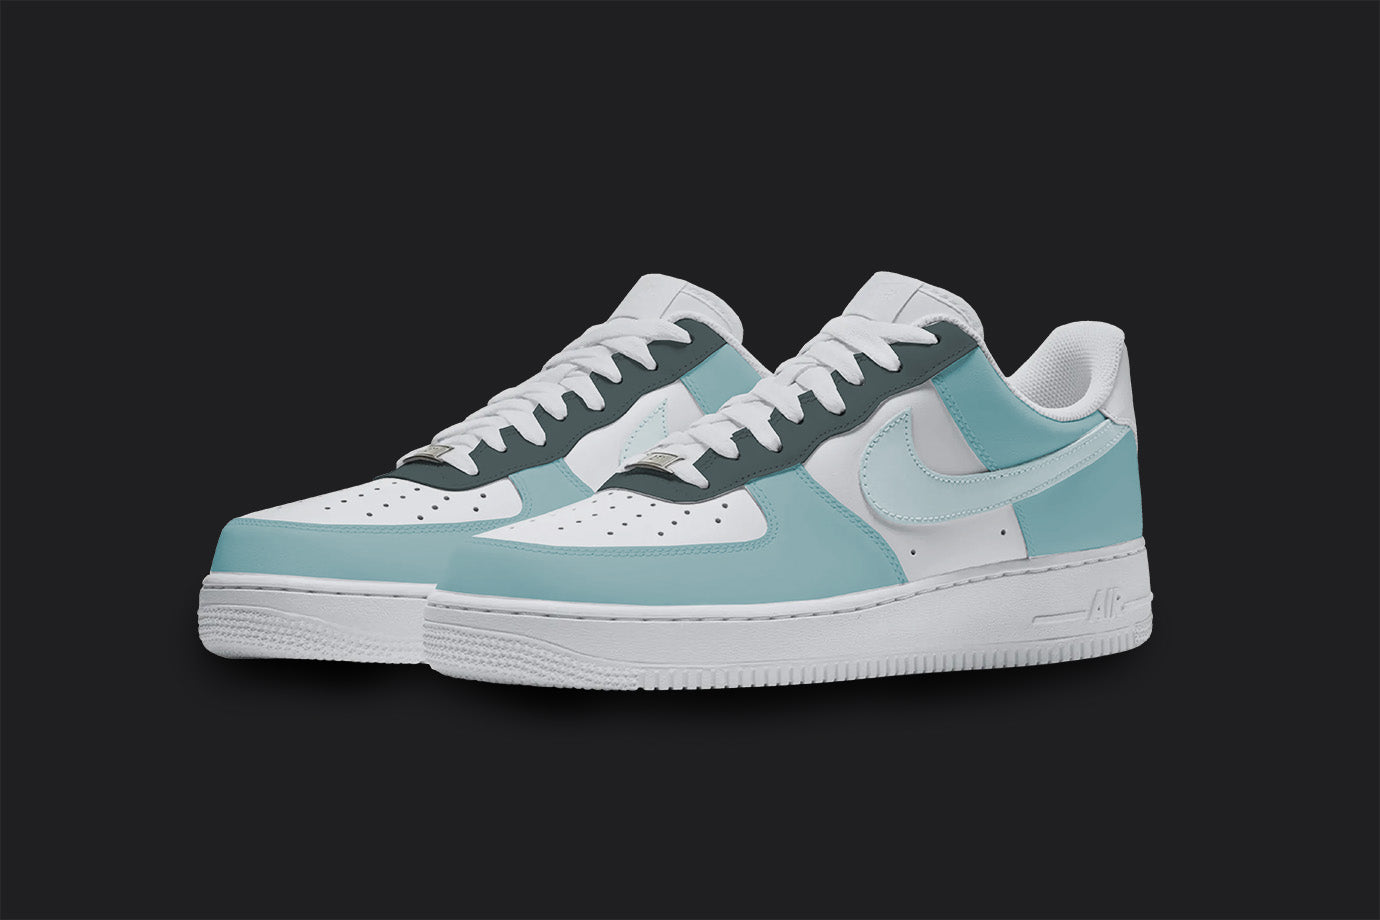 The image is of a Custom Nike Air force 1 sneaker pair on a blank black background. The custom sneakers are painted in lighter blue and gray colors. 